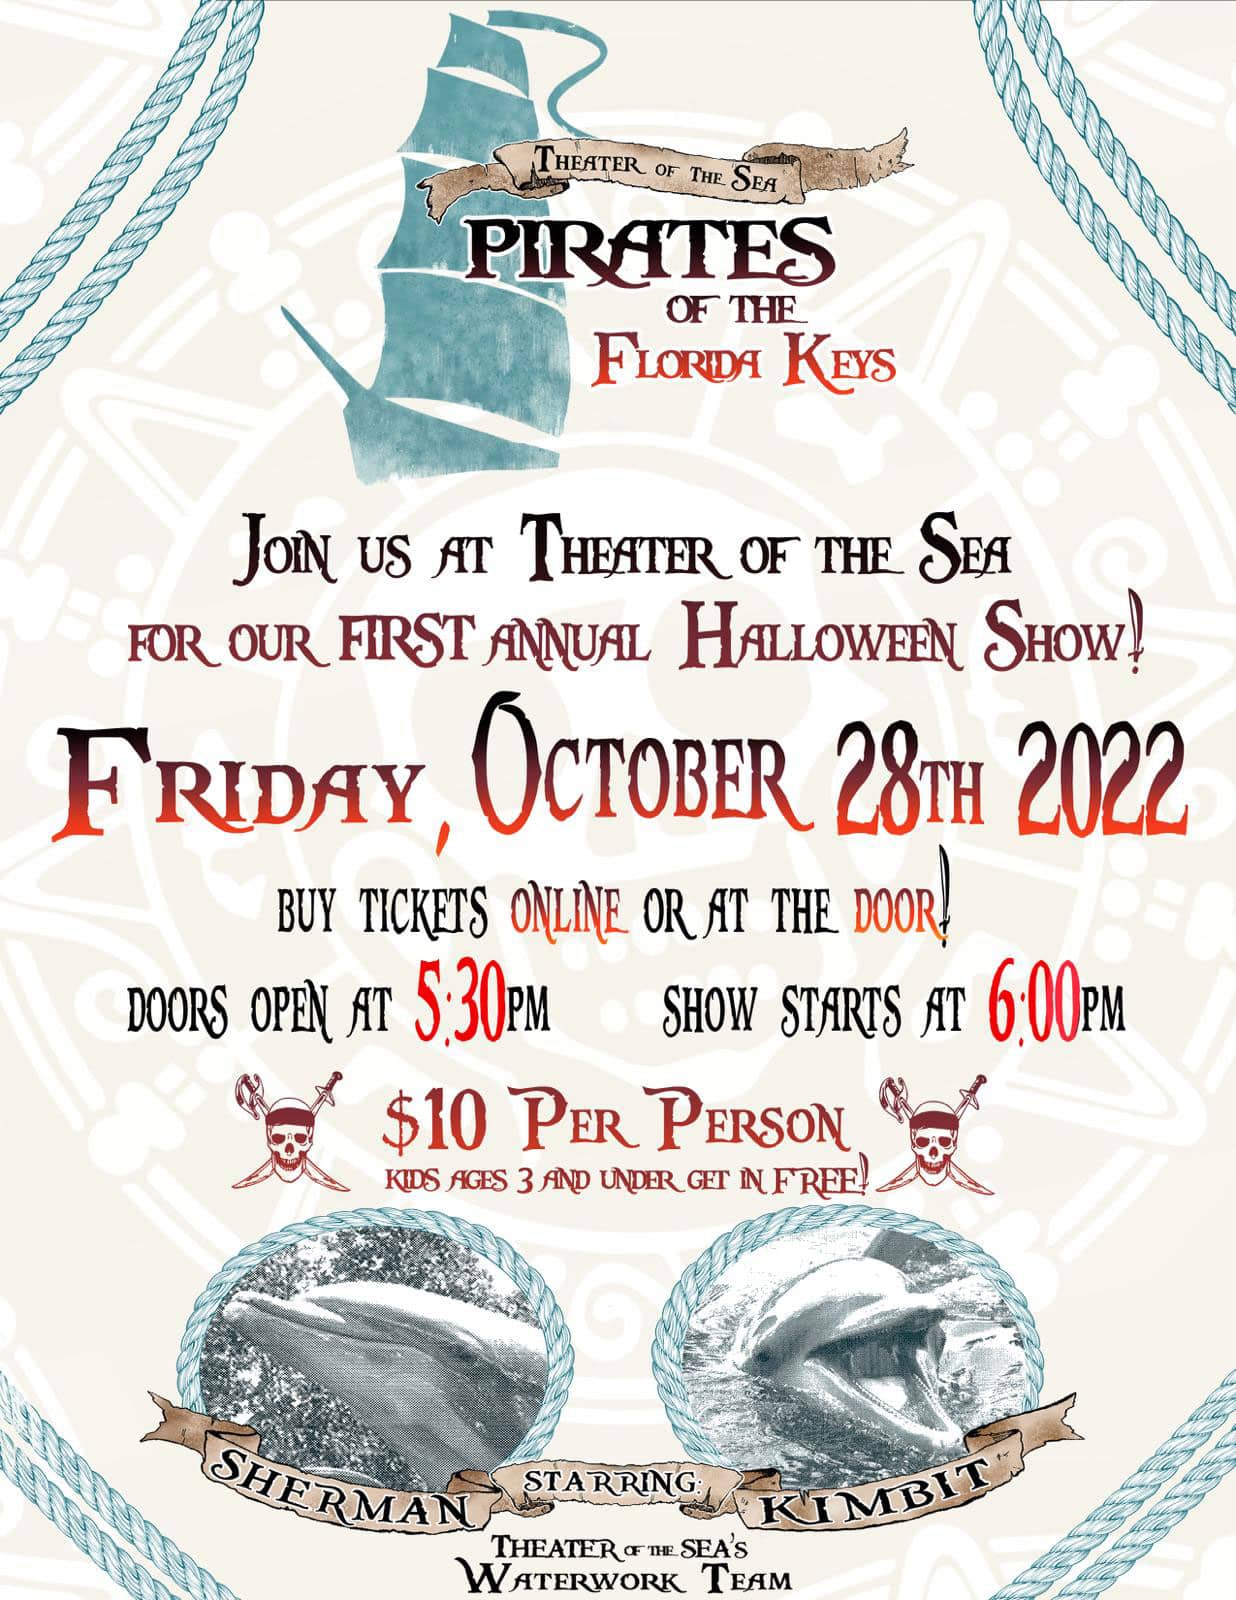 Theater of the Sea Halloween Show Flyer: Pirates of the Florida Keys Join us at Theater of the Sea for Our FIRST annual halloween show. Friday October 28th 2022. Buy Ticckets online or at the door. Doors open at 5:30pm. Show starts at 6:00pm. $10 per person. Kids ages 3 and under get in free. Starring Sherman and Kimbit.